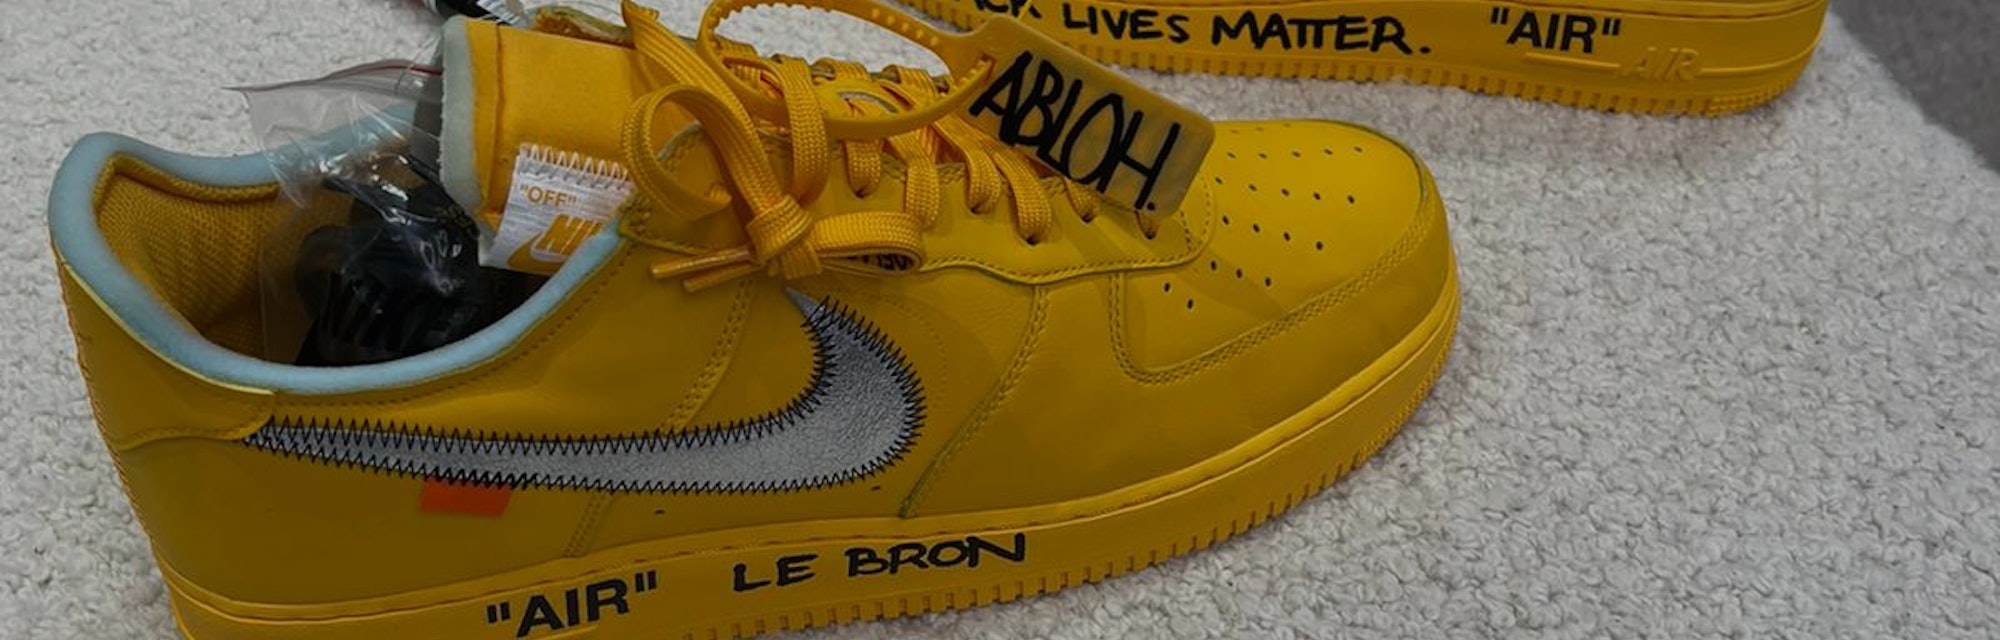 Off-White Nike Air Force 1 Yellow LeBron James 